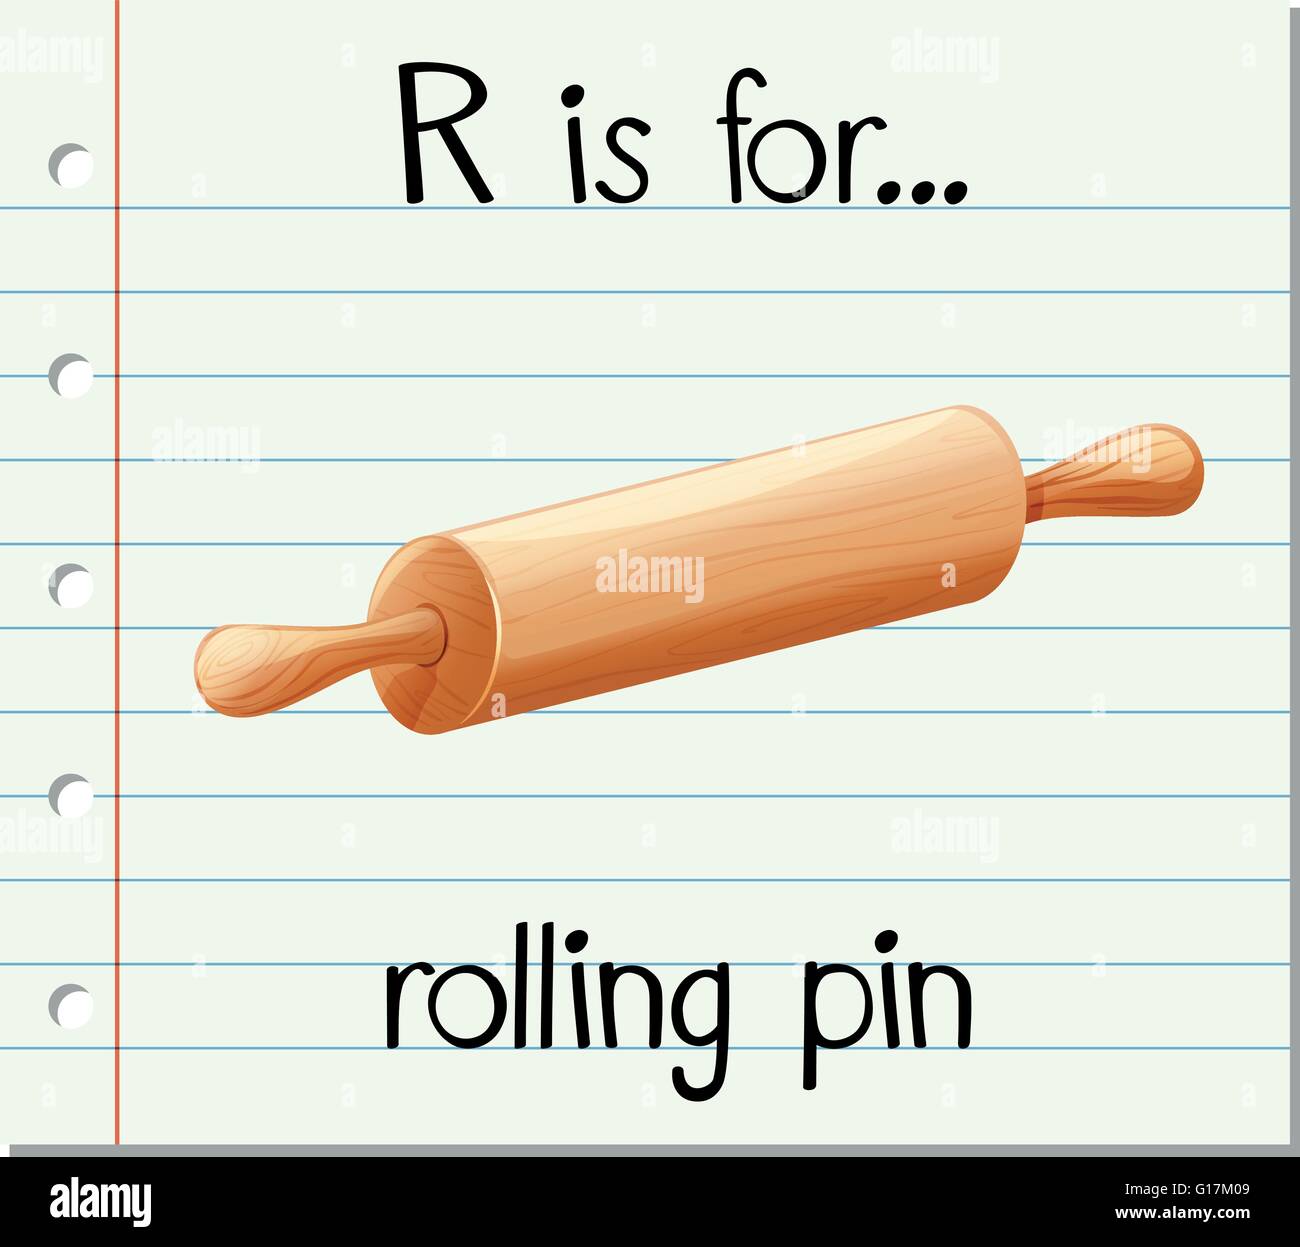 Flashcard letter R is for rolling pin illustration Stock Vector